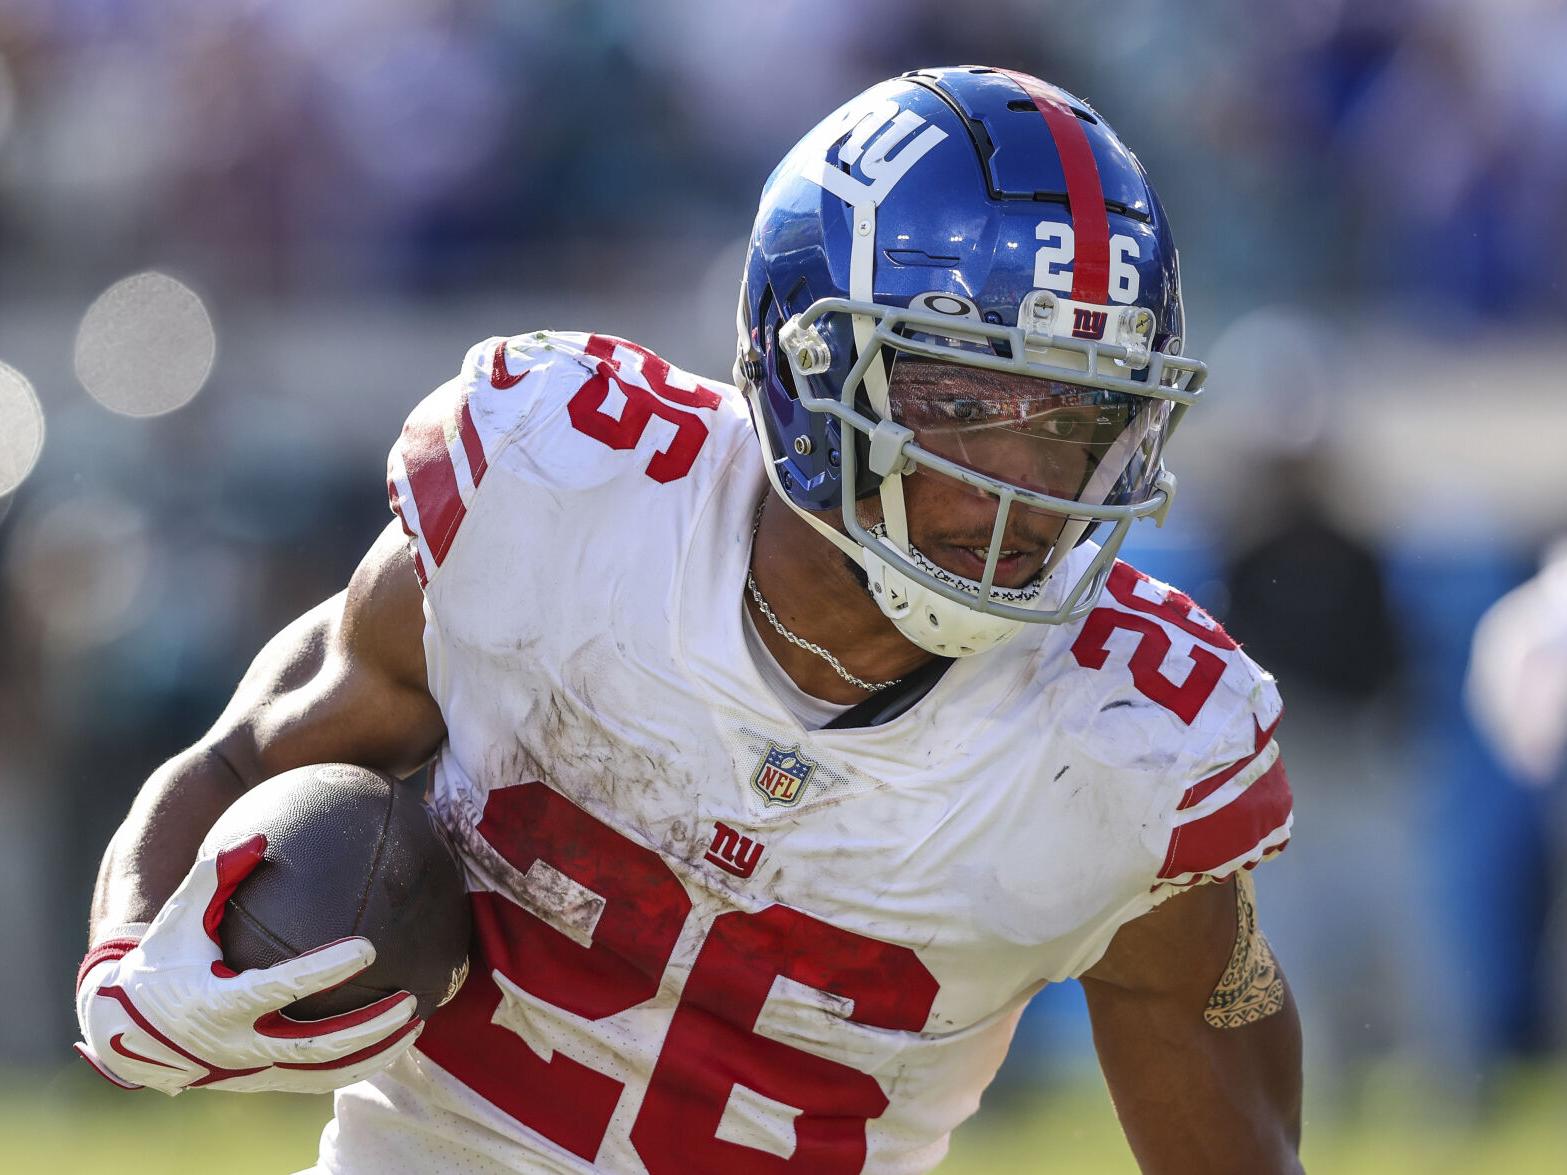 NFL player props, odds, expert picks for Week 4, 2022: Saquon Barkley's  longest rush goes for over 16.5 yards 